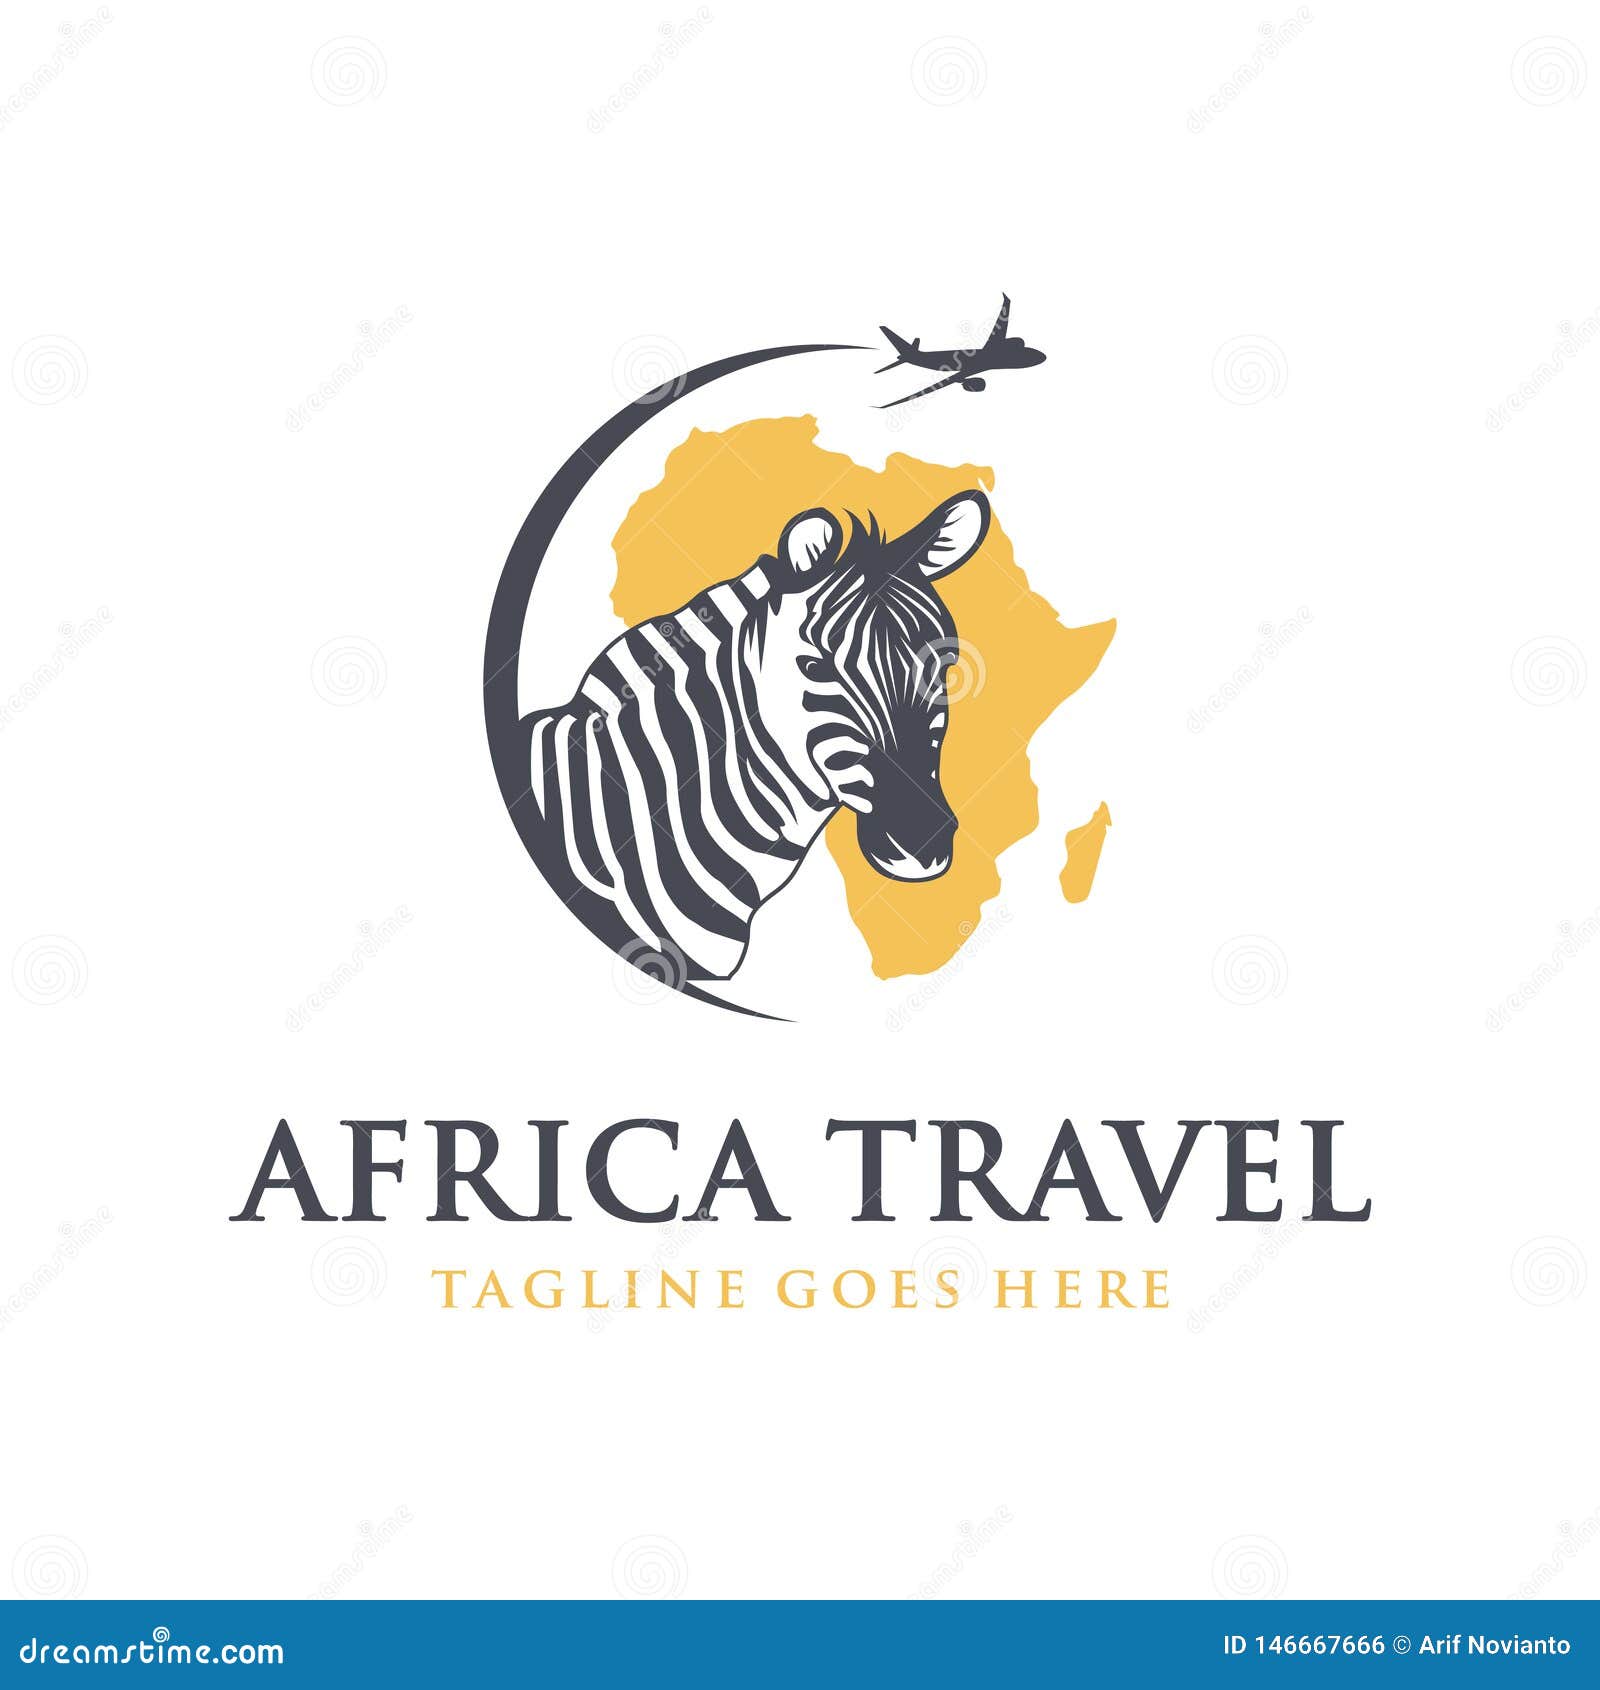 no 1 travel agency in africa